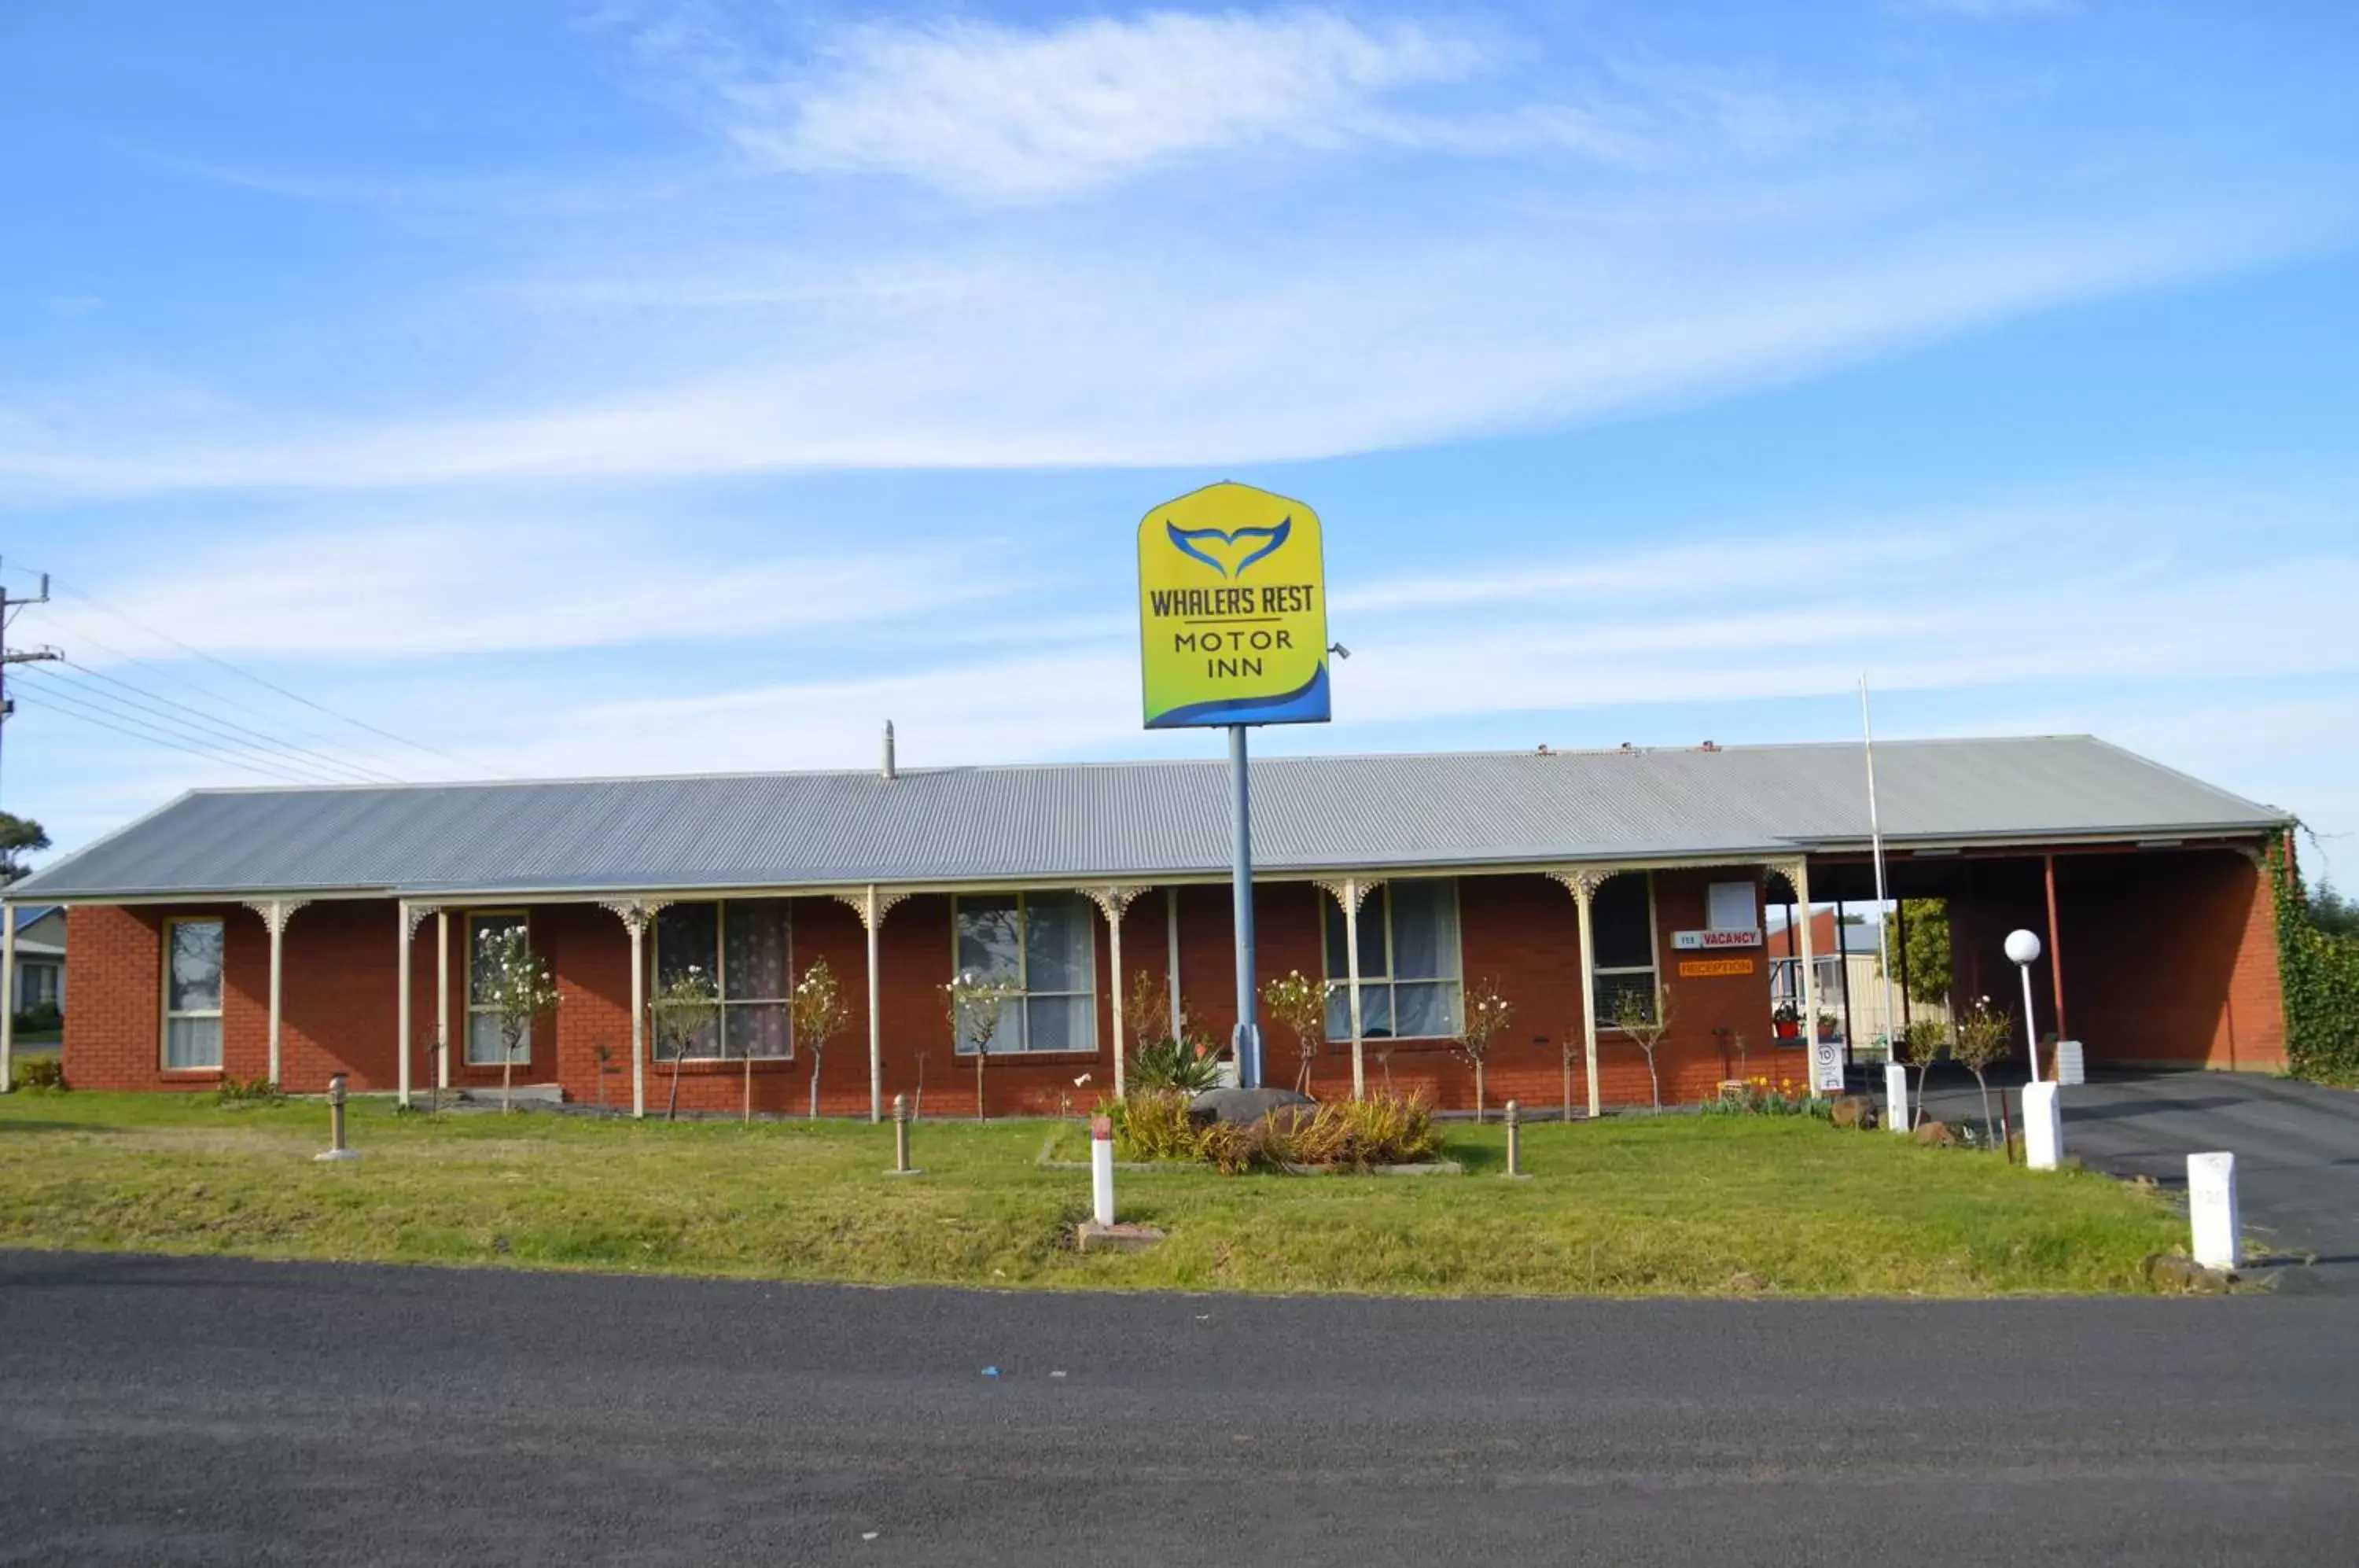 Property Building in Whalers Rest Motor Inn